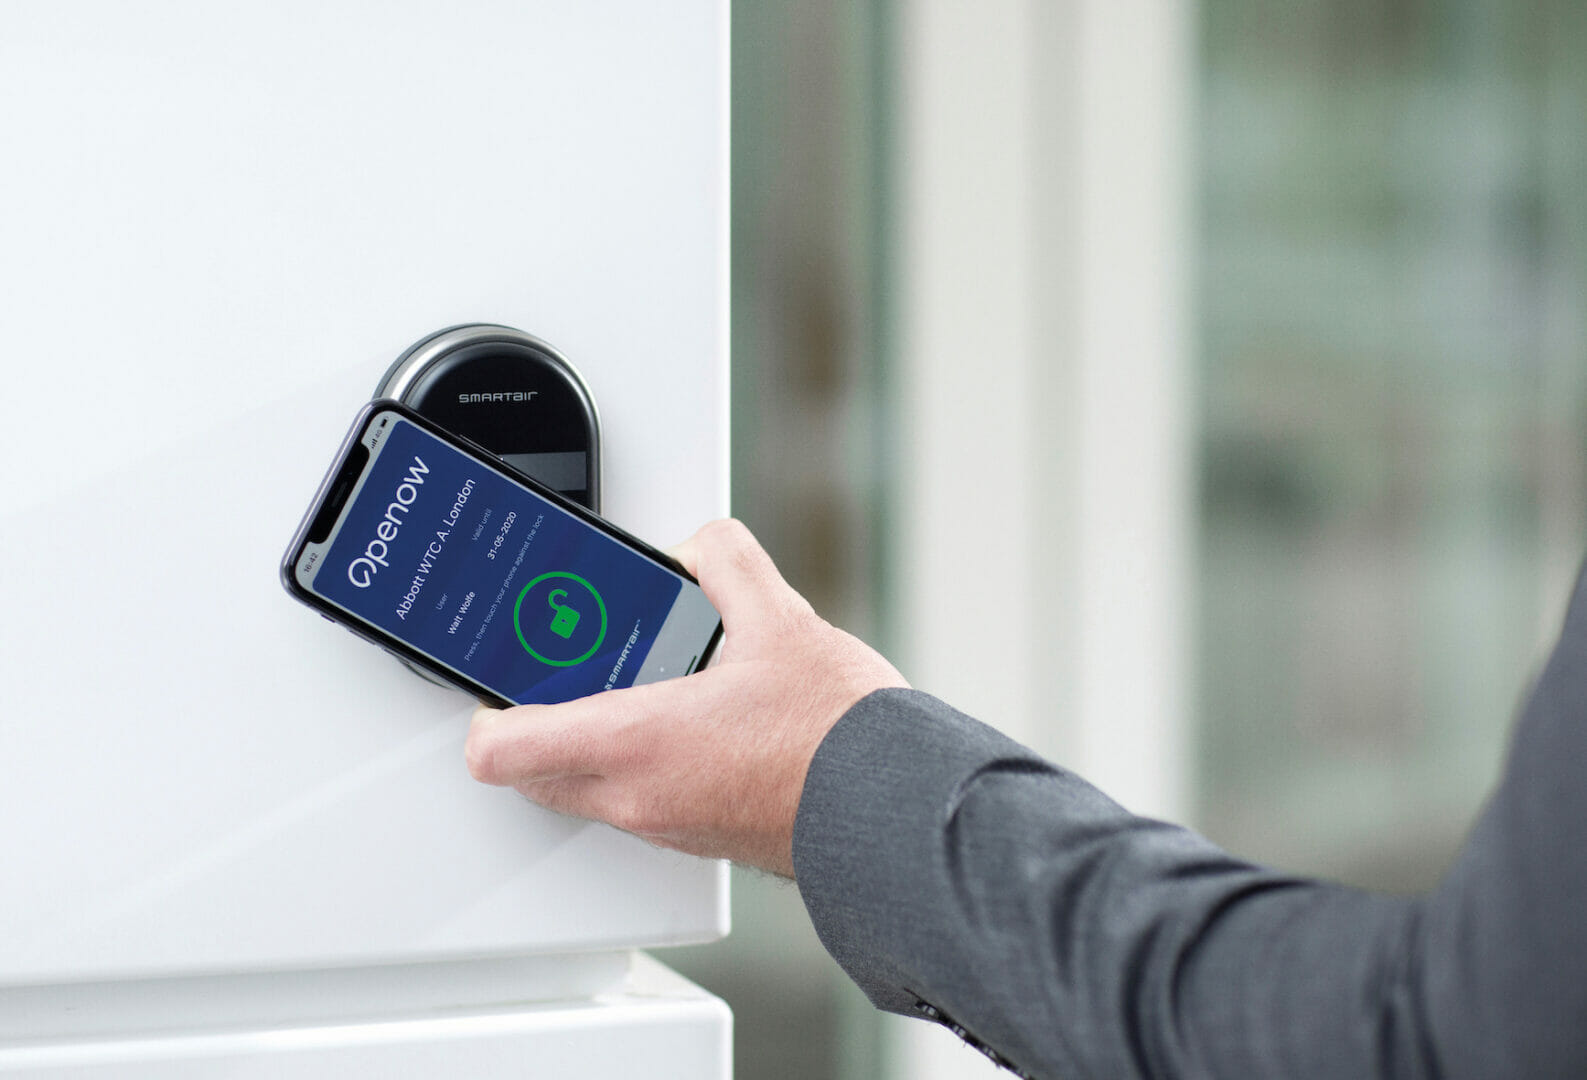 SMARTair® from Mul-T-Lock opens the door to convenient and cost effective check-ins